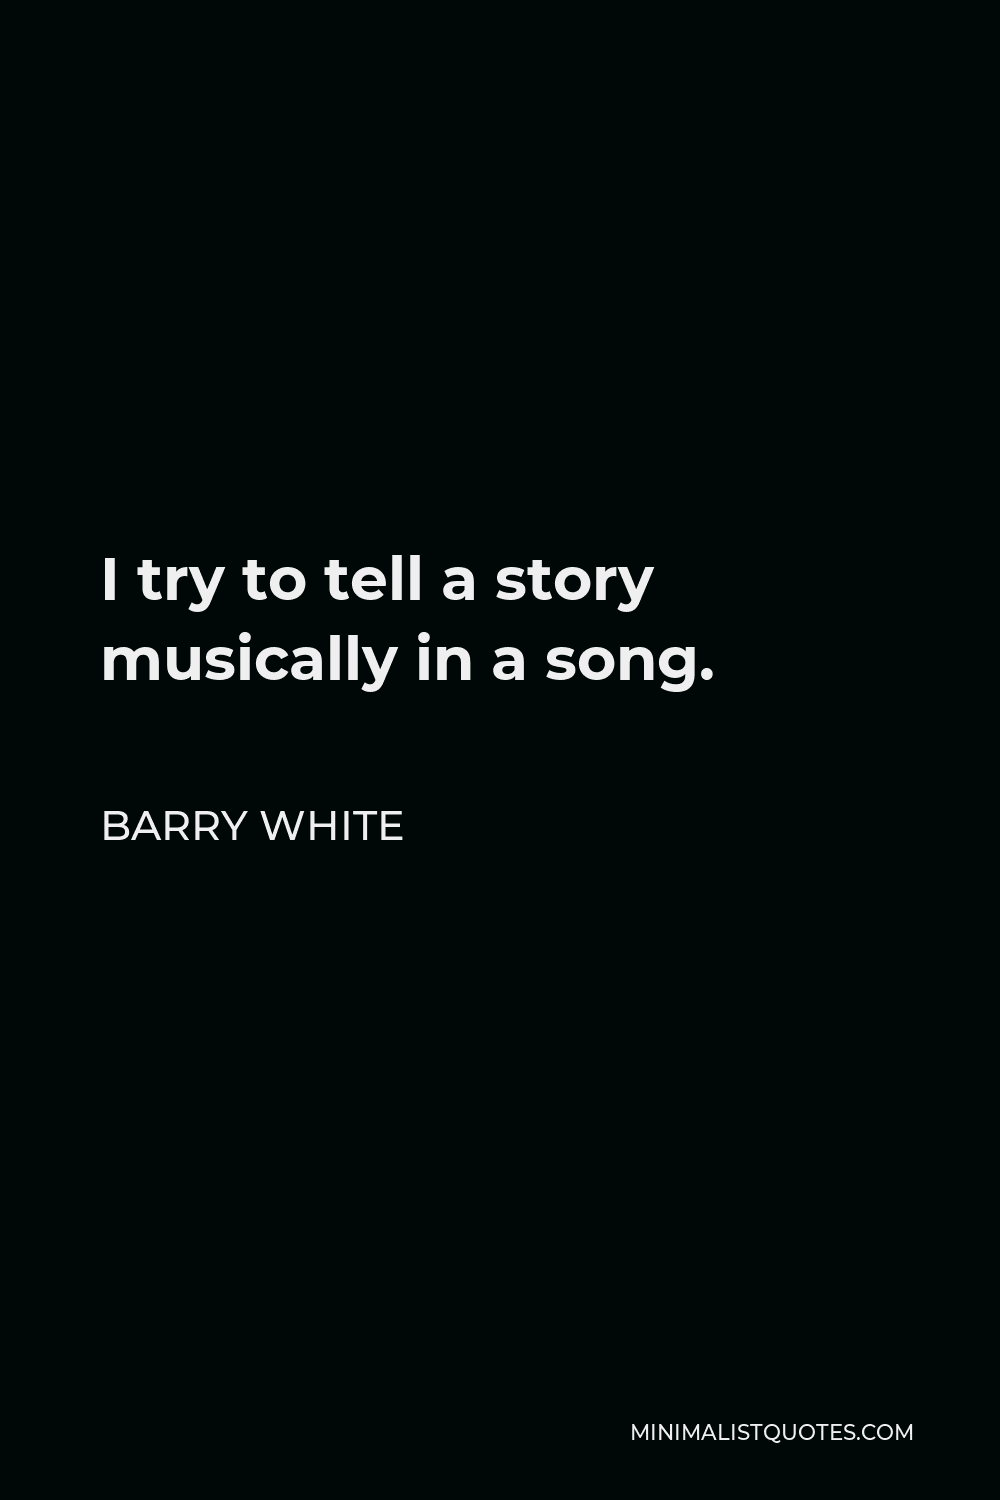 Barry White Quote - I try to tell a story musically in a song.